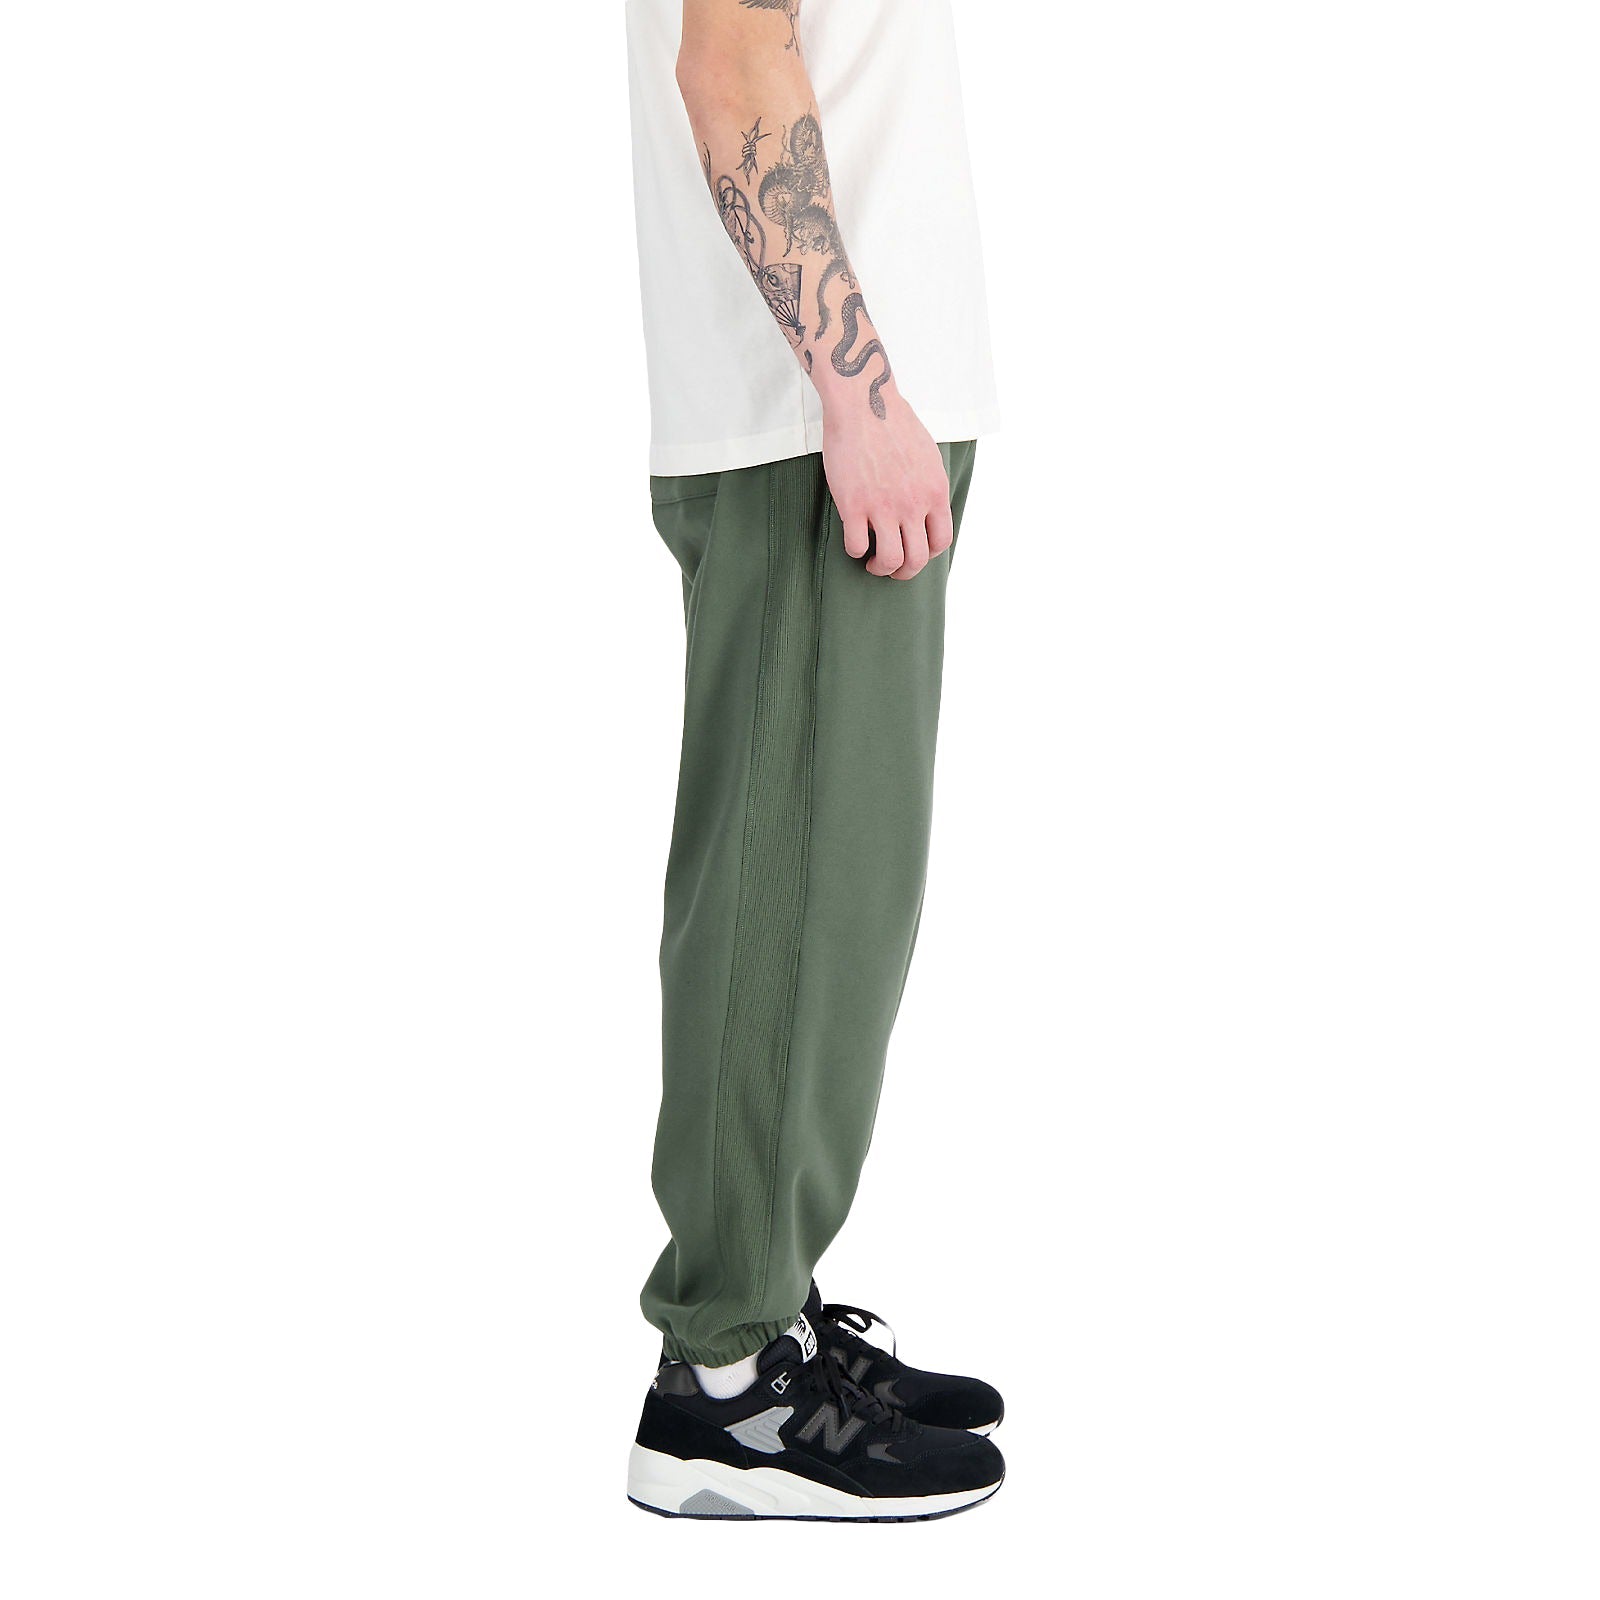 New Balance Men Remastered French Terry Sweatpant Deep Olive MP31503-DON - BOTTOMS - Canada